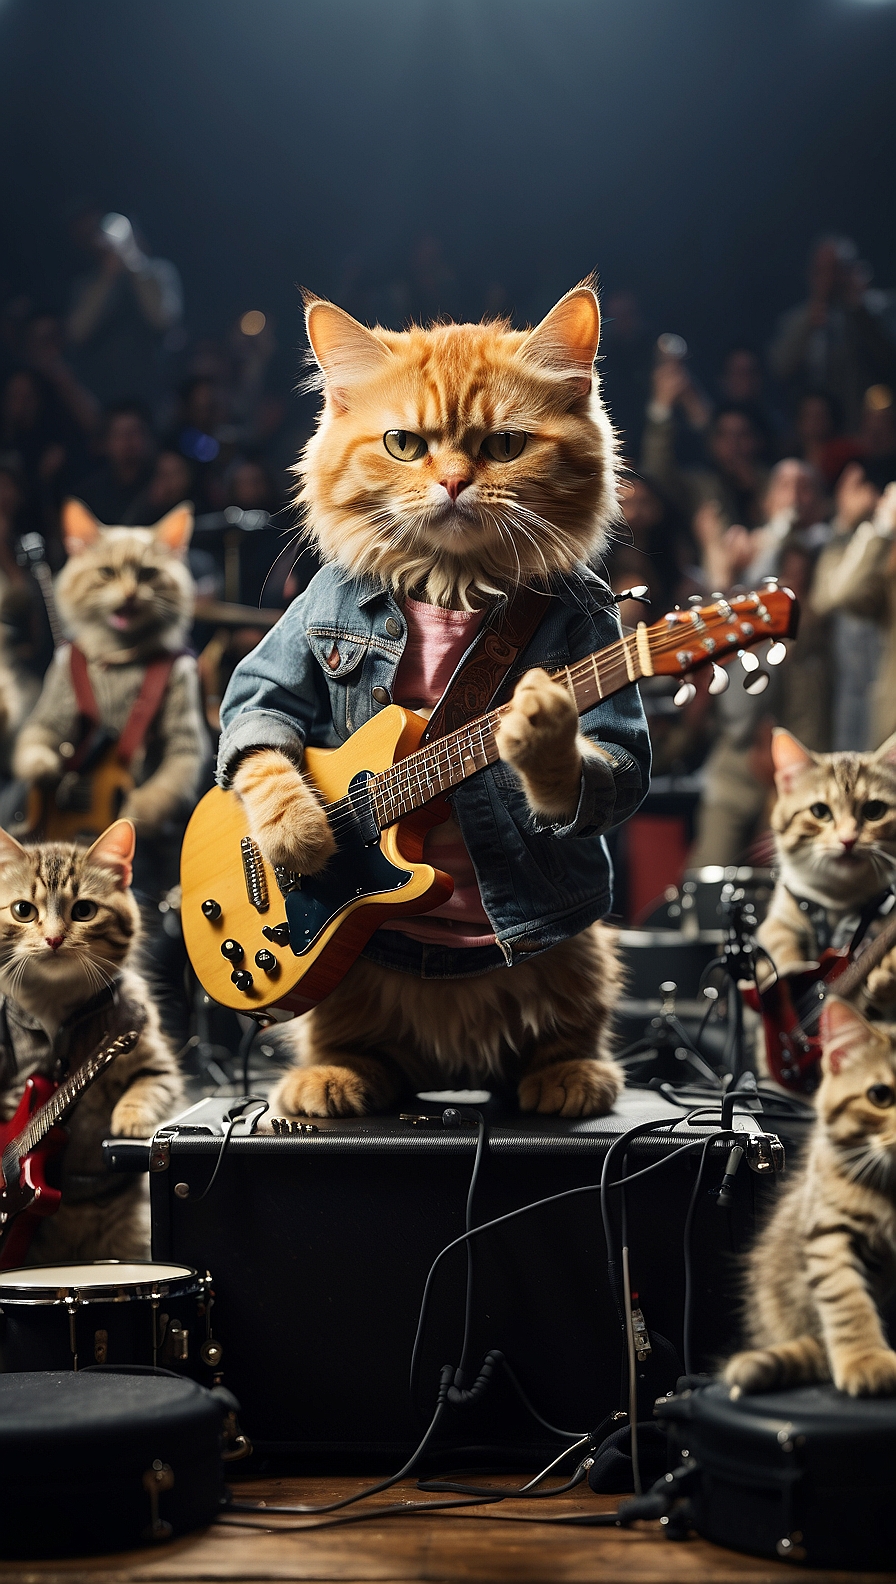 Default_A_cat_is_giving_a_rock_concert_on_stage_there_are_cats_7